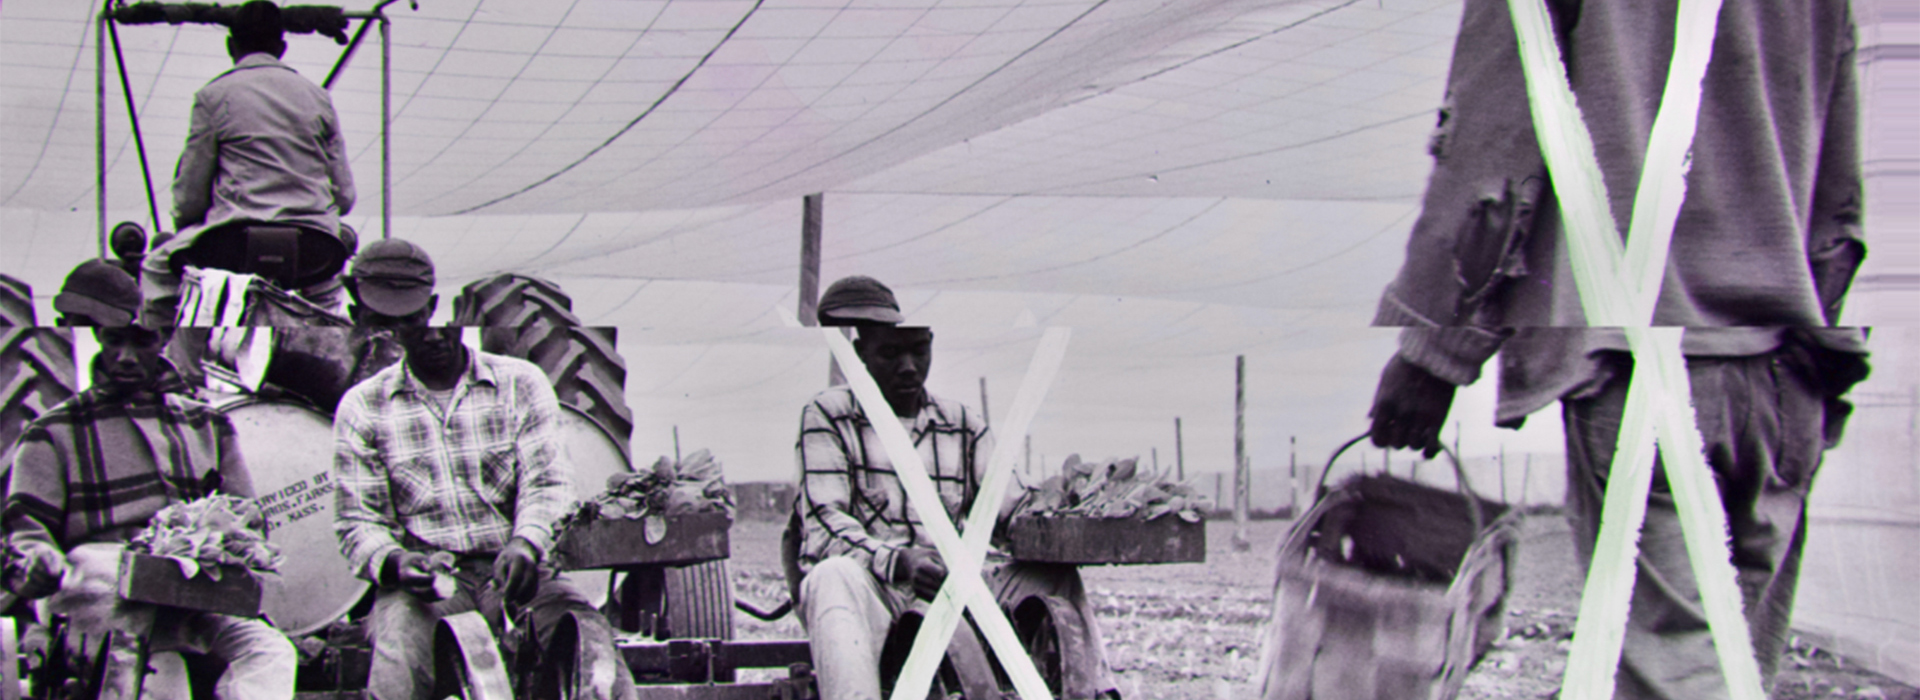 Black and white photo of several workers on a tobacco plantation with an X over two individuals